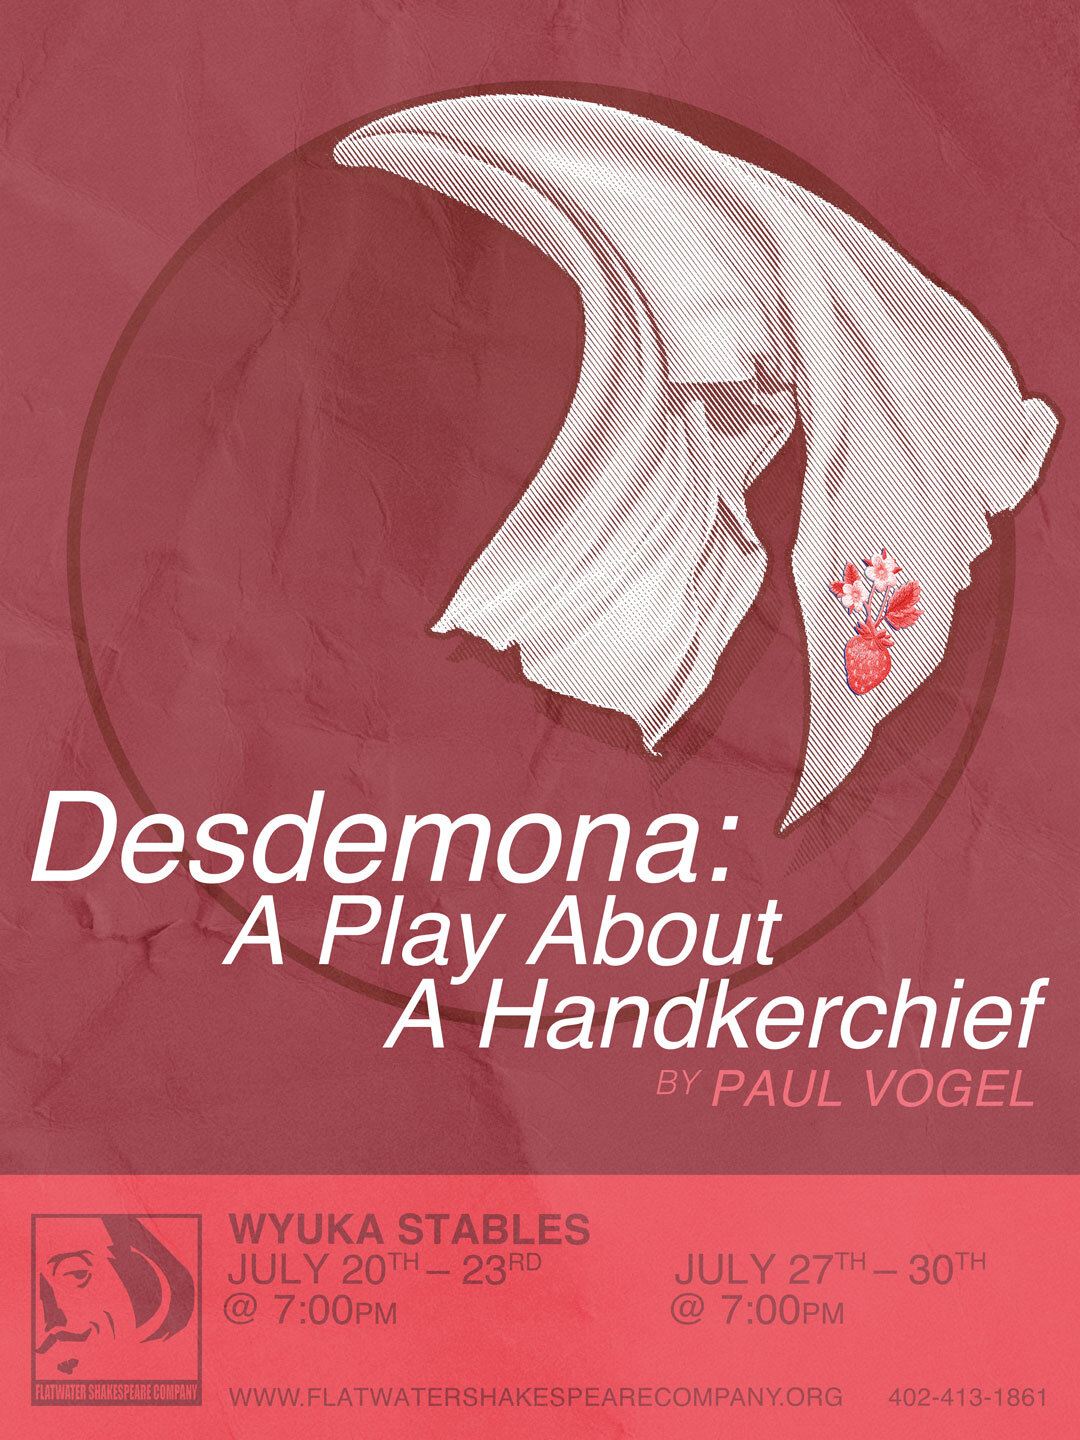 7/28 SEN - SENIOR (65+): Friday. July 28, 2023 | 7:00 p.m. - 10:00 p.m. CST | Wyuka Stables (Desdemona: A Play about a Handkerchief)